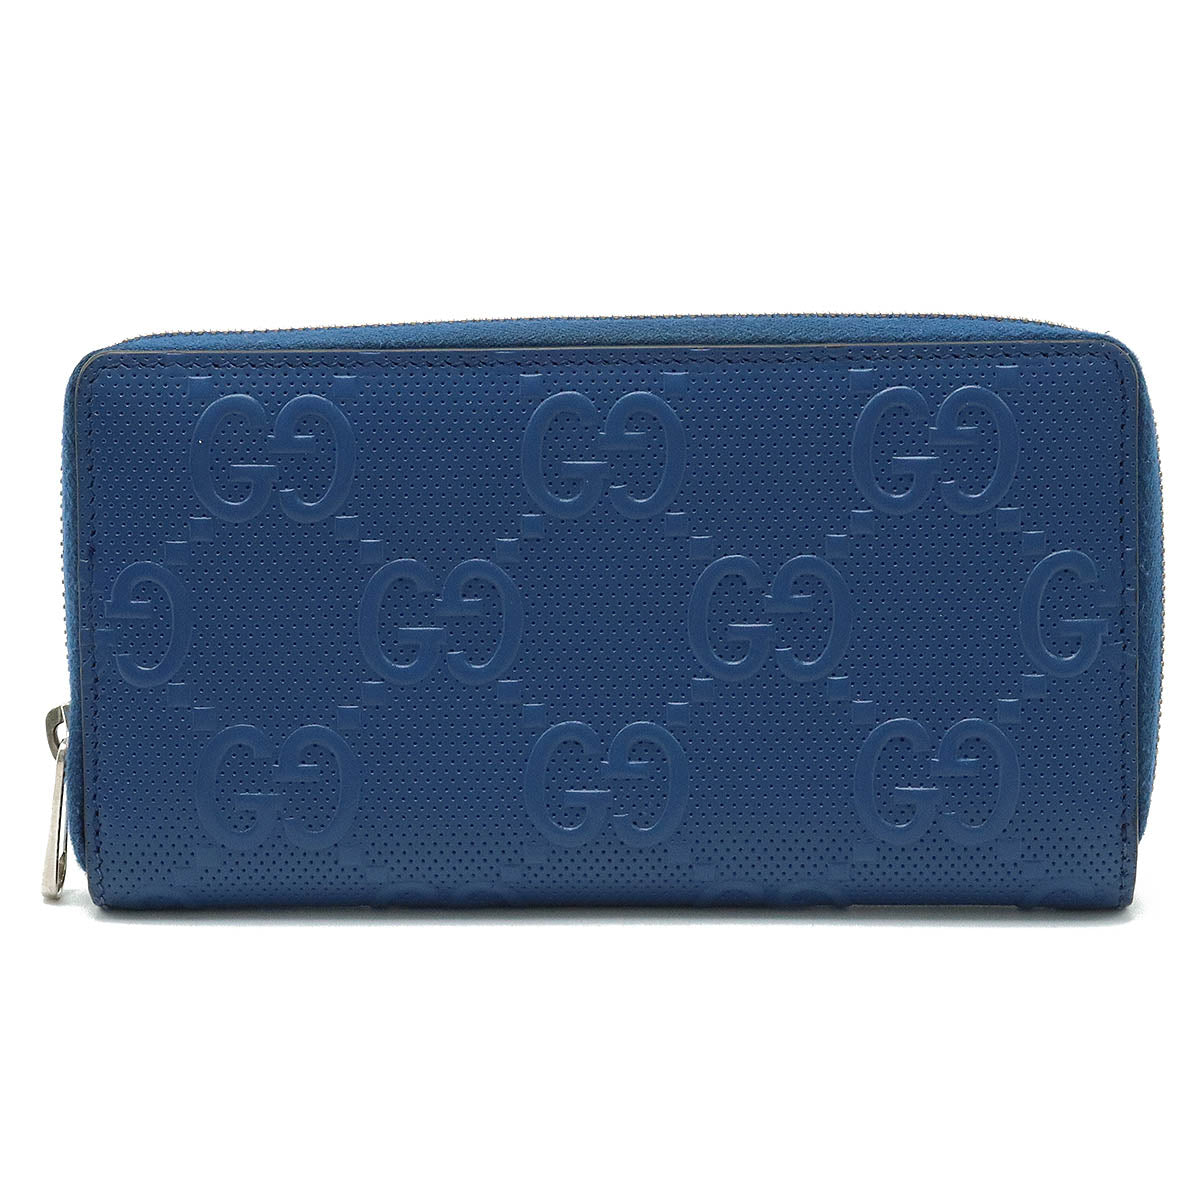 Gucci Gucci GG Embos Zipper Round Wallet Long Wallet Leather Blue Blue Silver Gold  625558 (Ancient) Gucci Gucci Gucci Gucci Gucci Gucci Gucci Gucci Gucci Gucci Gucci Gucci Gucci Gucci Gucci Gucci Gucci Gucci Gucci Gucci Gucci Gucci